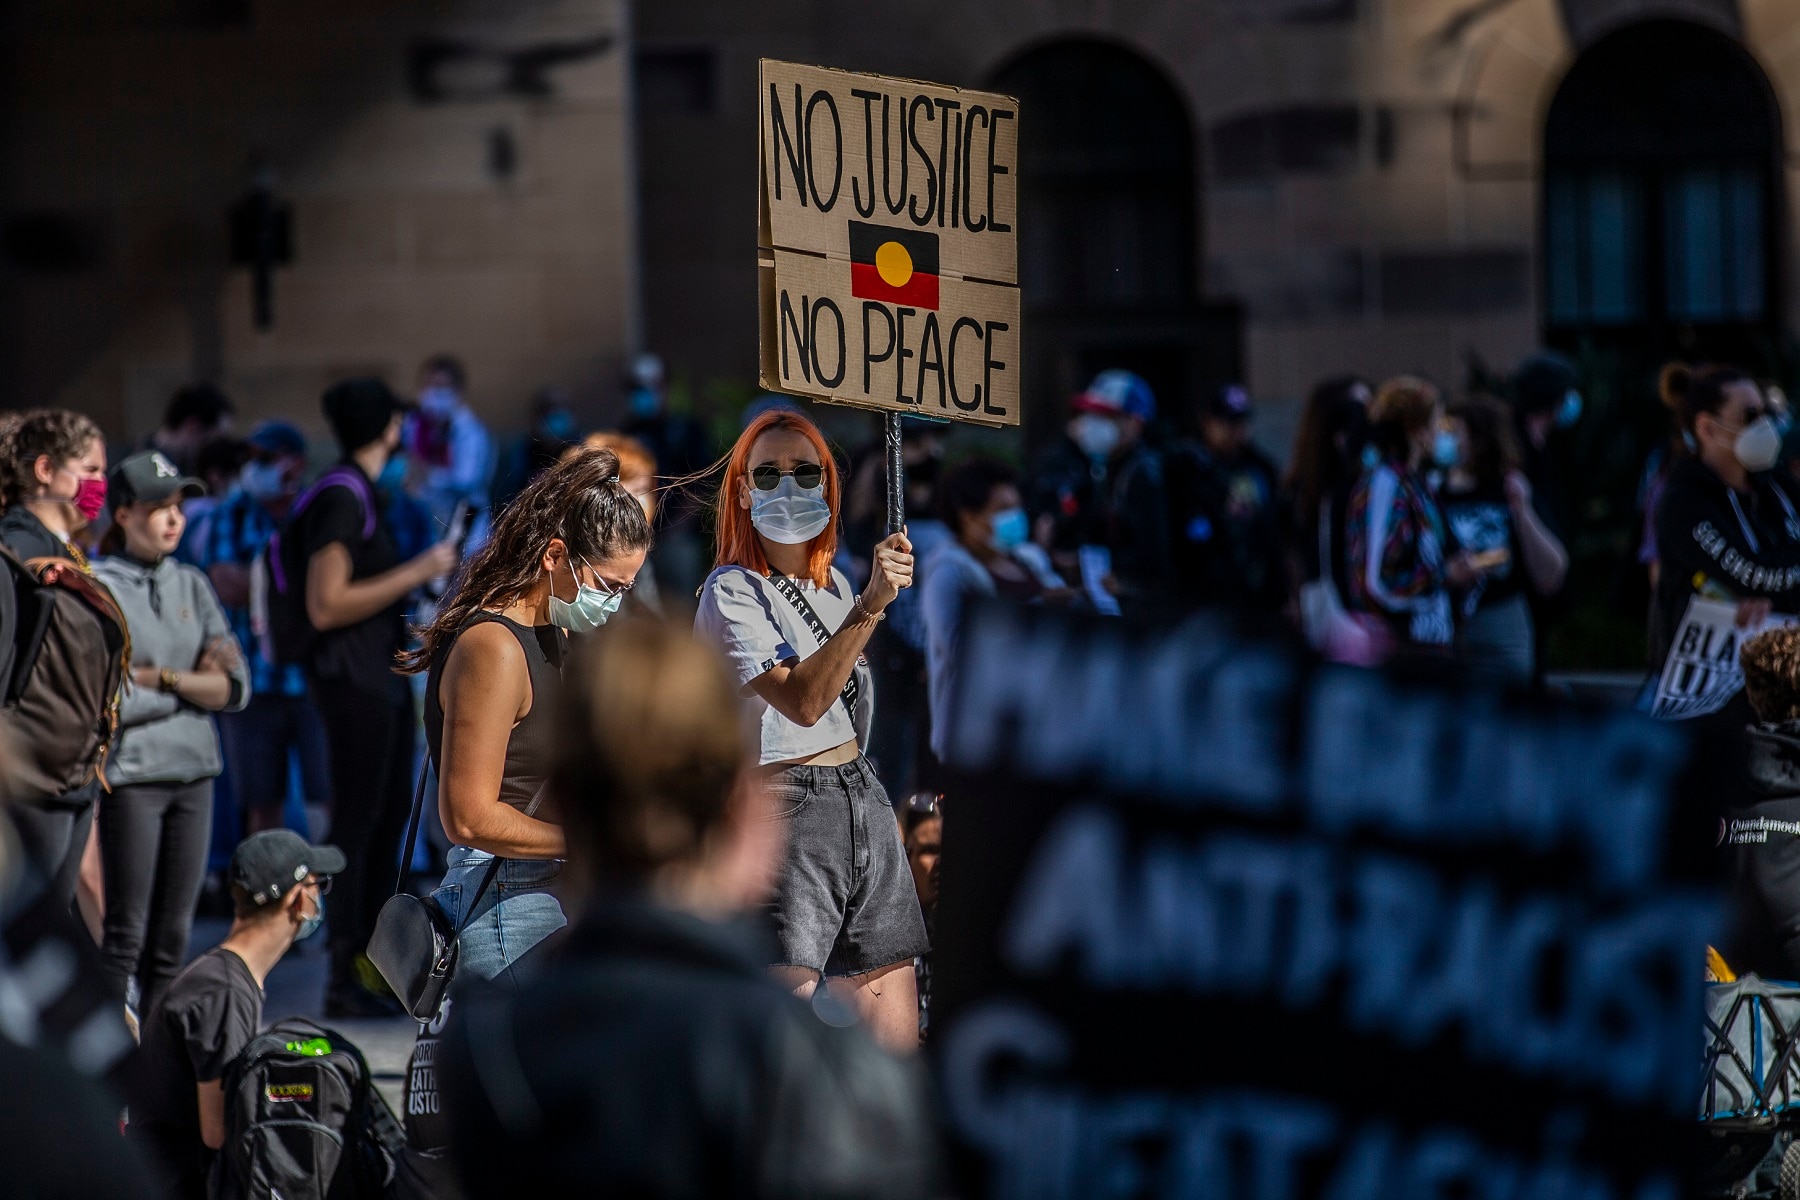 Protesters participate in a Black Lives Matter (BLM) rally at King George Square in Brisbane.